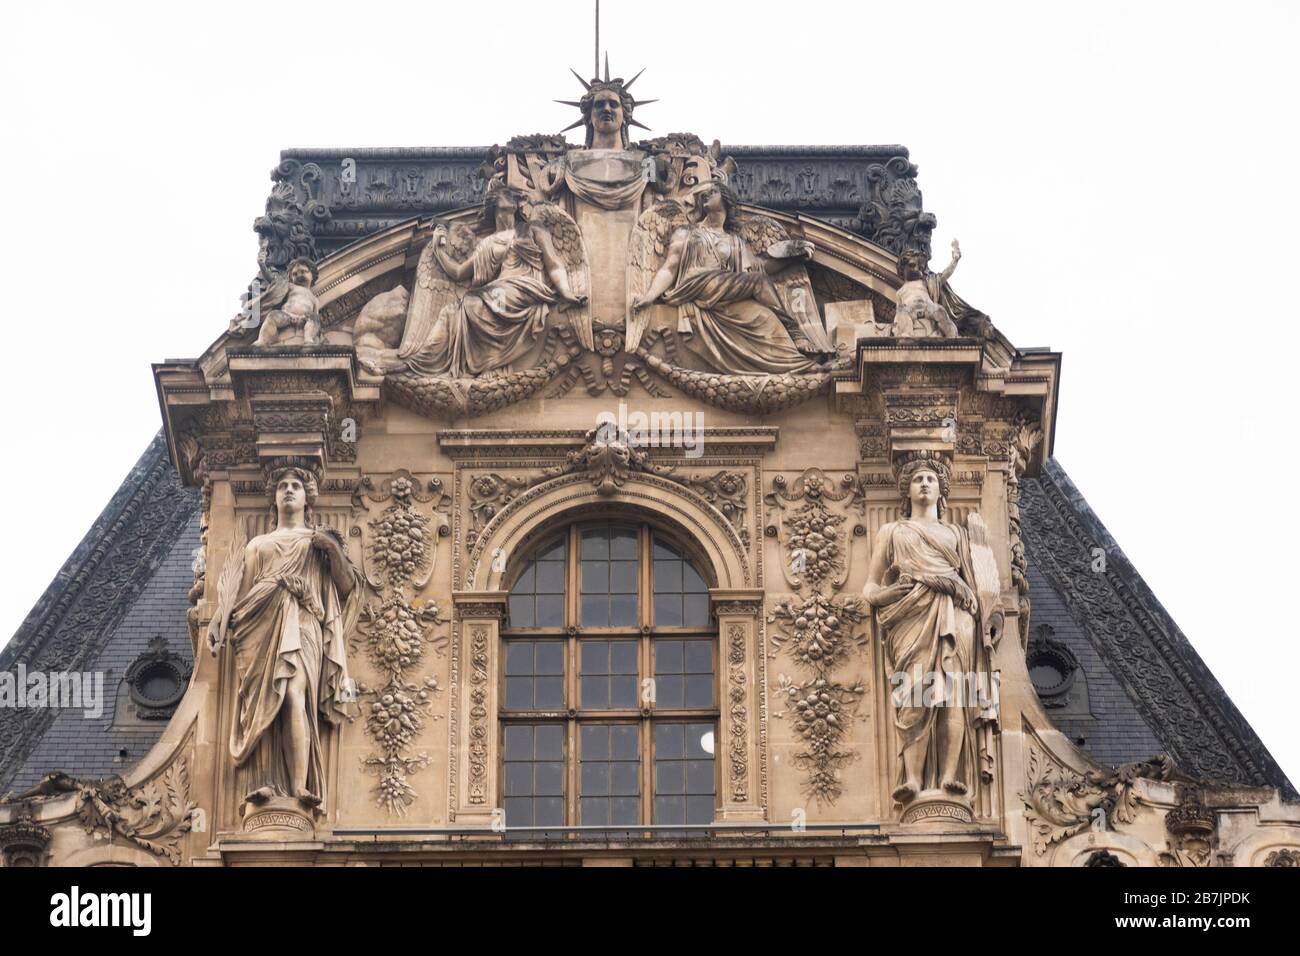 Louvre courtyard buildings roof sculptures Stock Photo